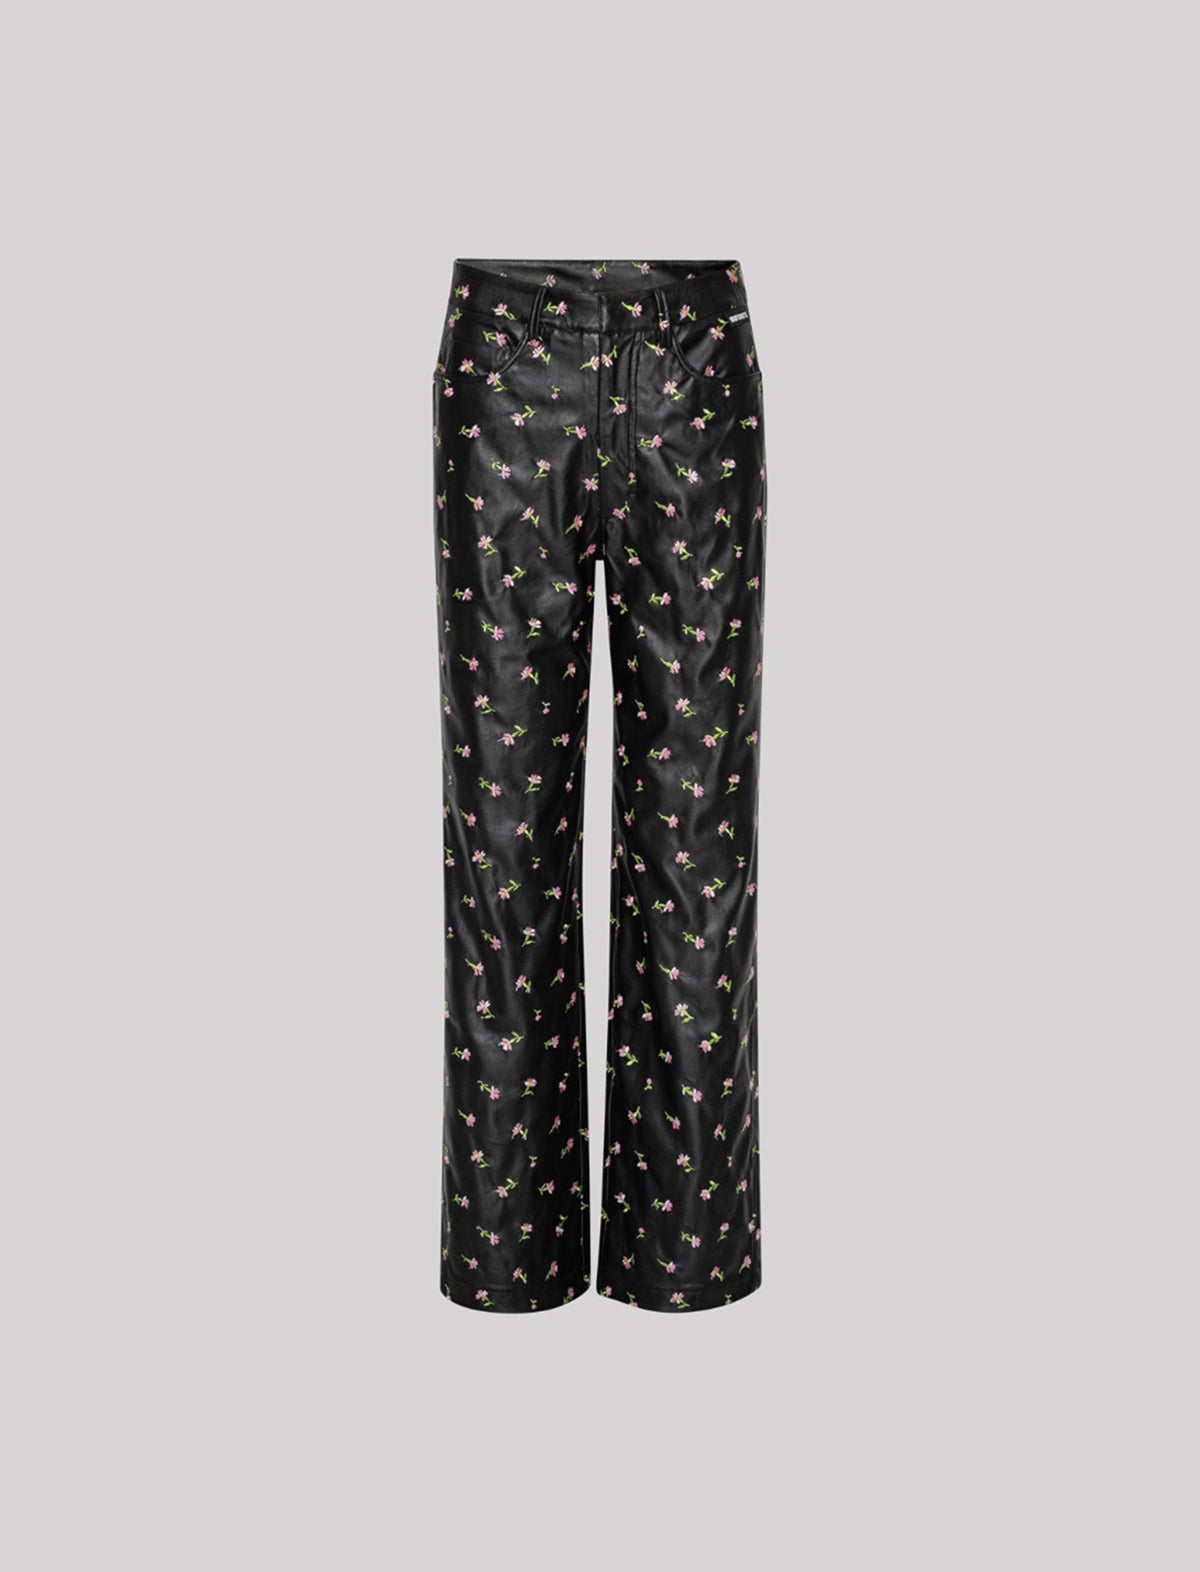 ROTATE BIRGER CHRISTENSEN PU Leather Straight Pants In Black/ Pink